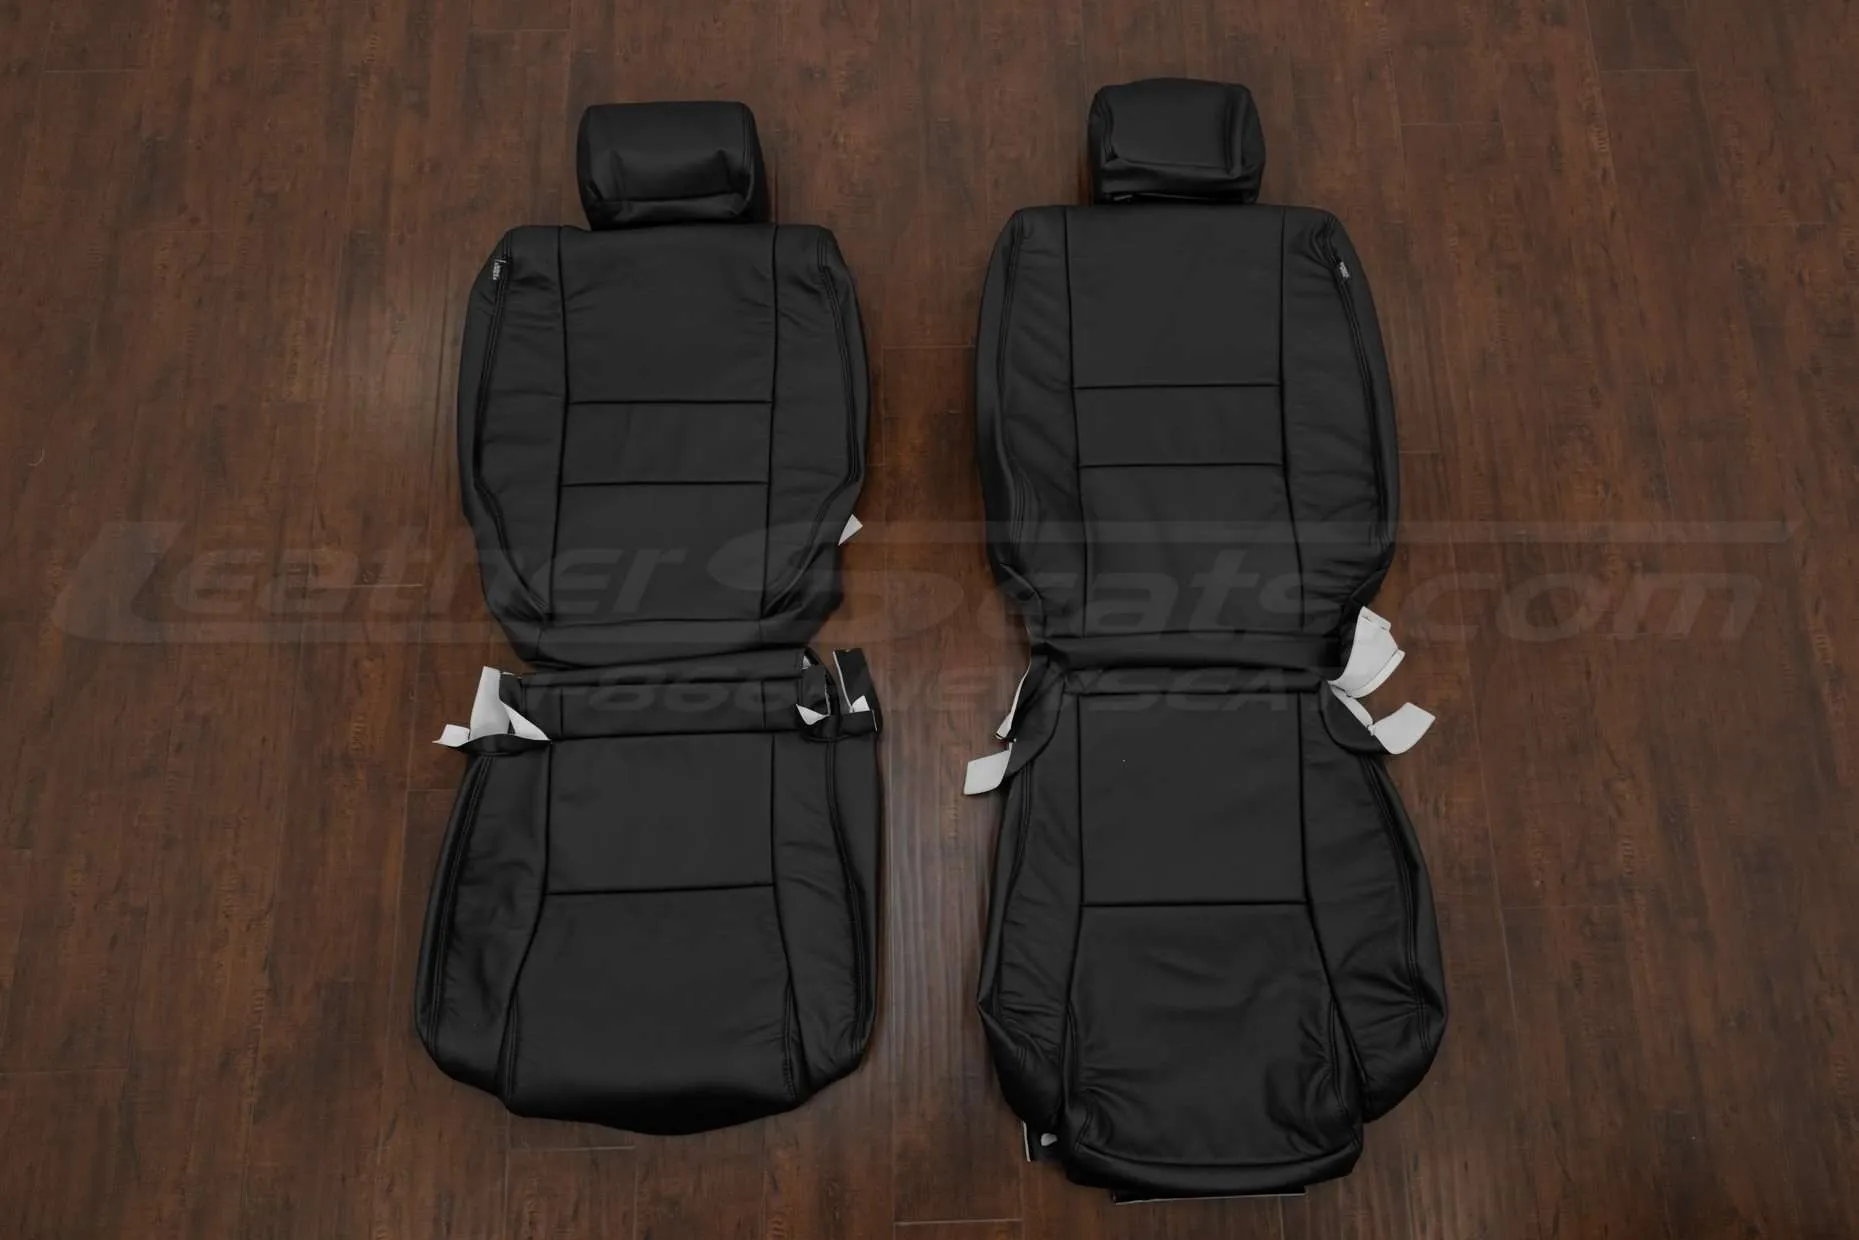 Toyota Sequoia Leather Seat Kit - Black - Front seat upholstery